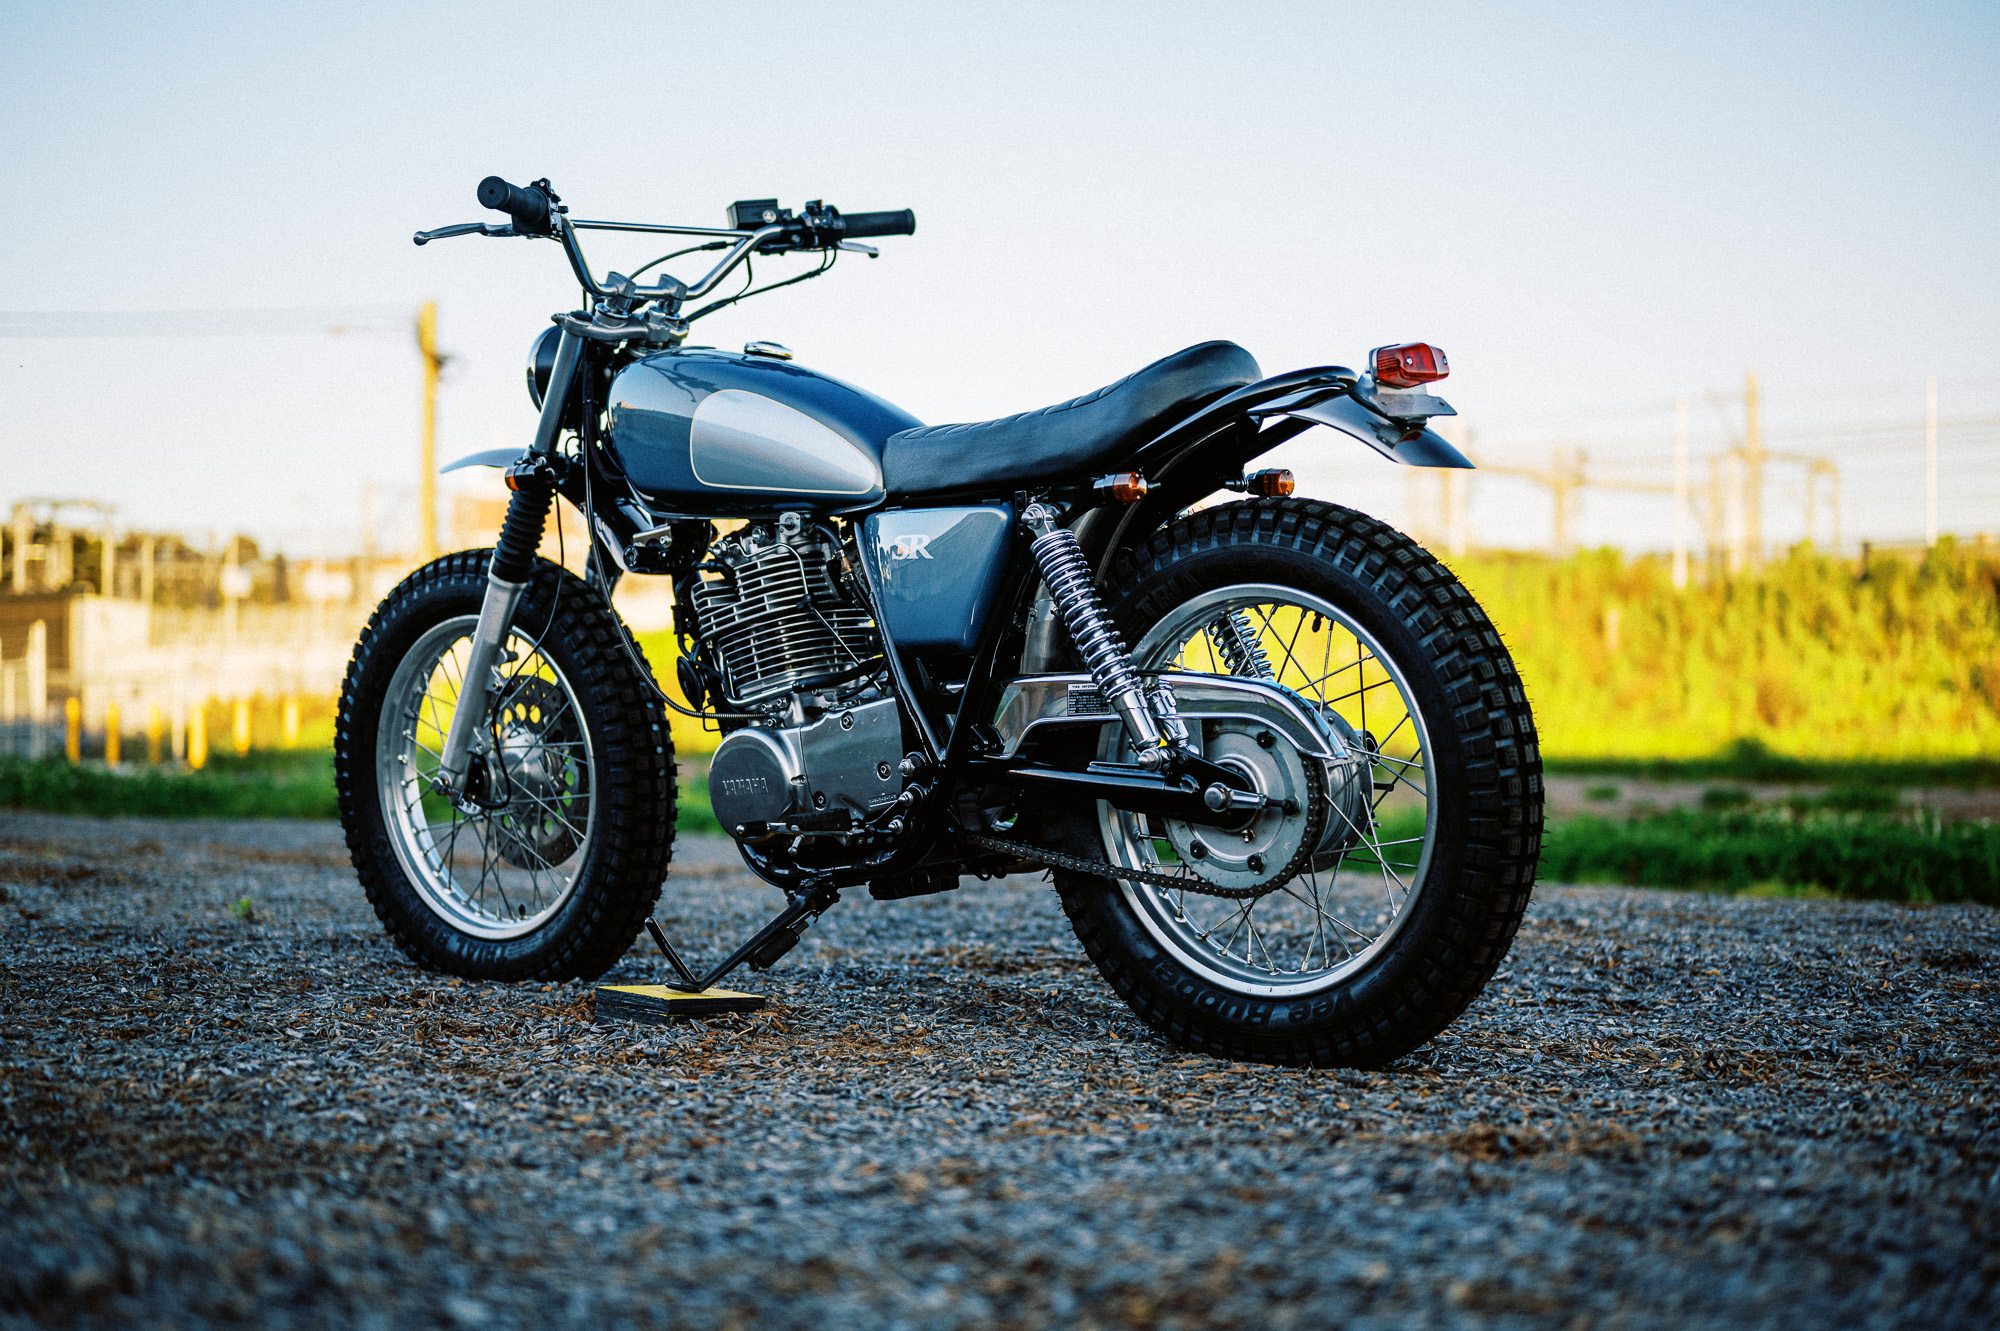 a custom Yamaha SR400 Motorcycle in Sydney at dusk in a vacant lot